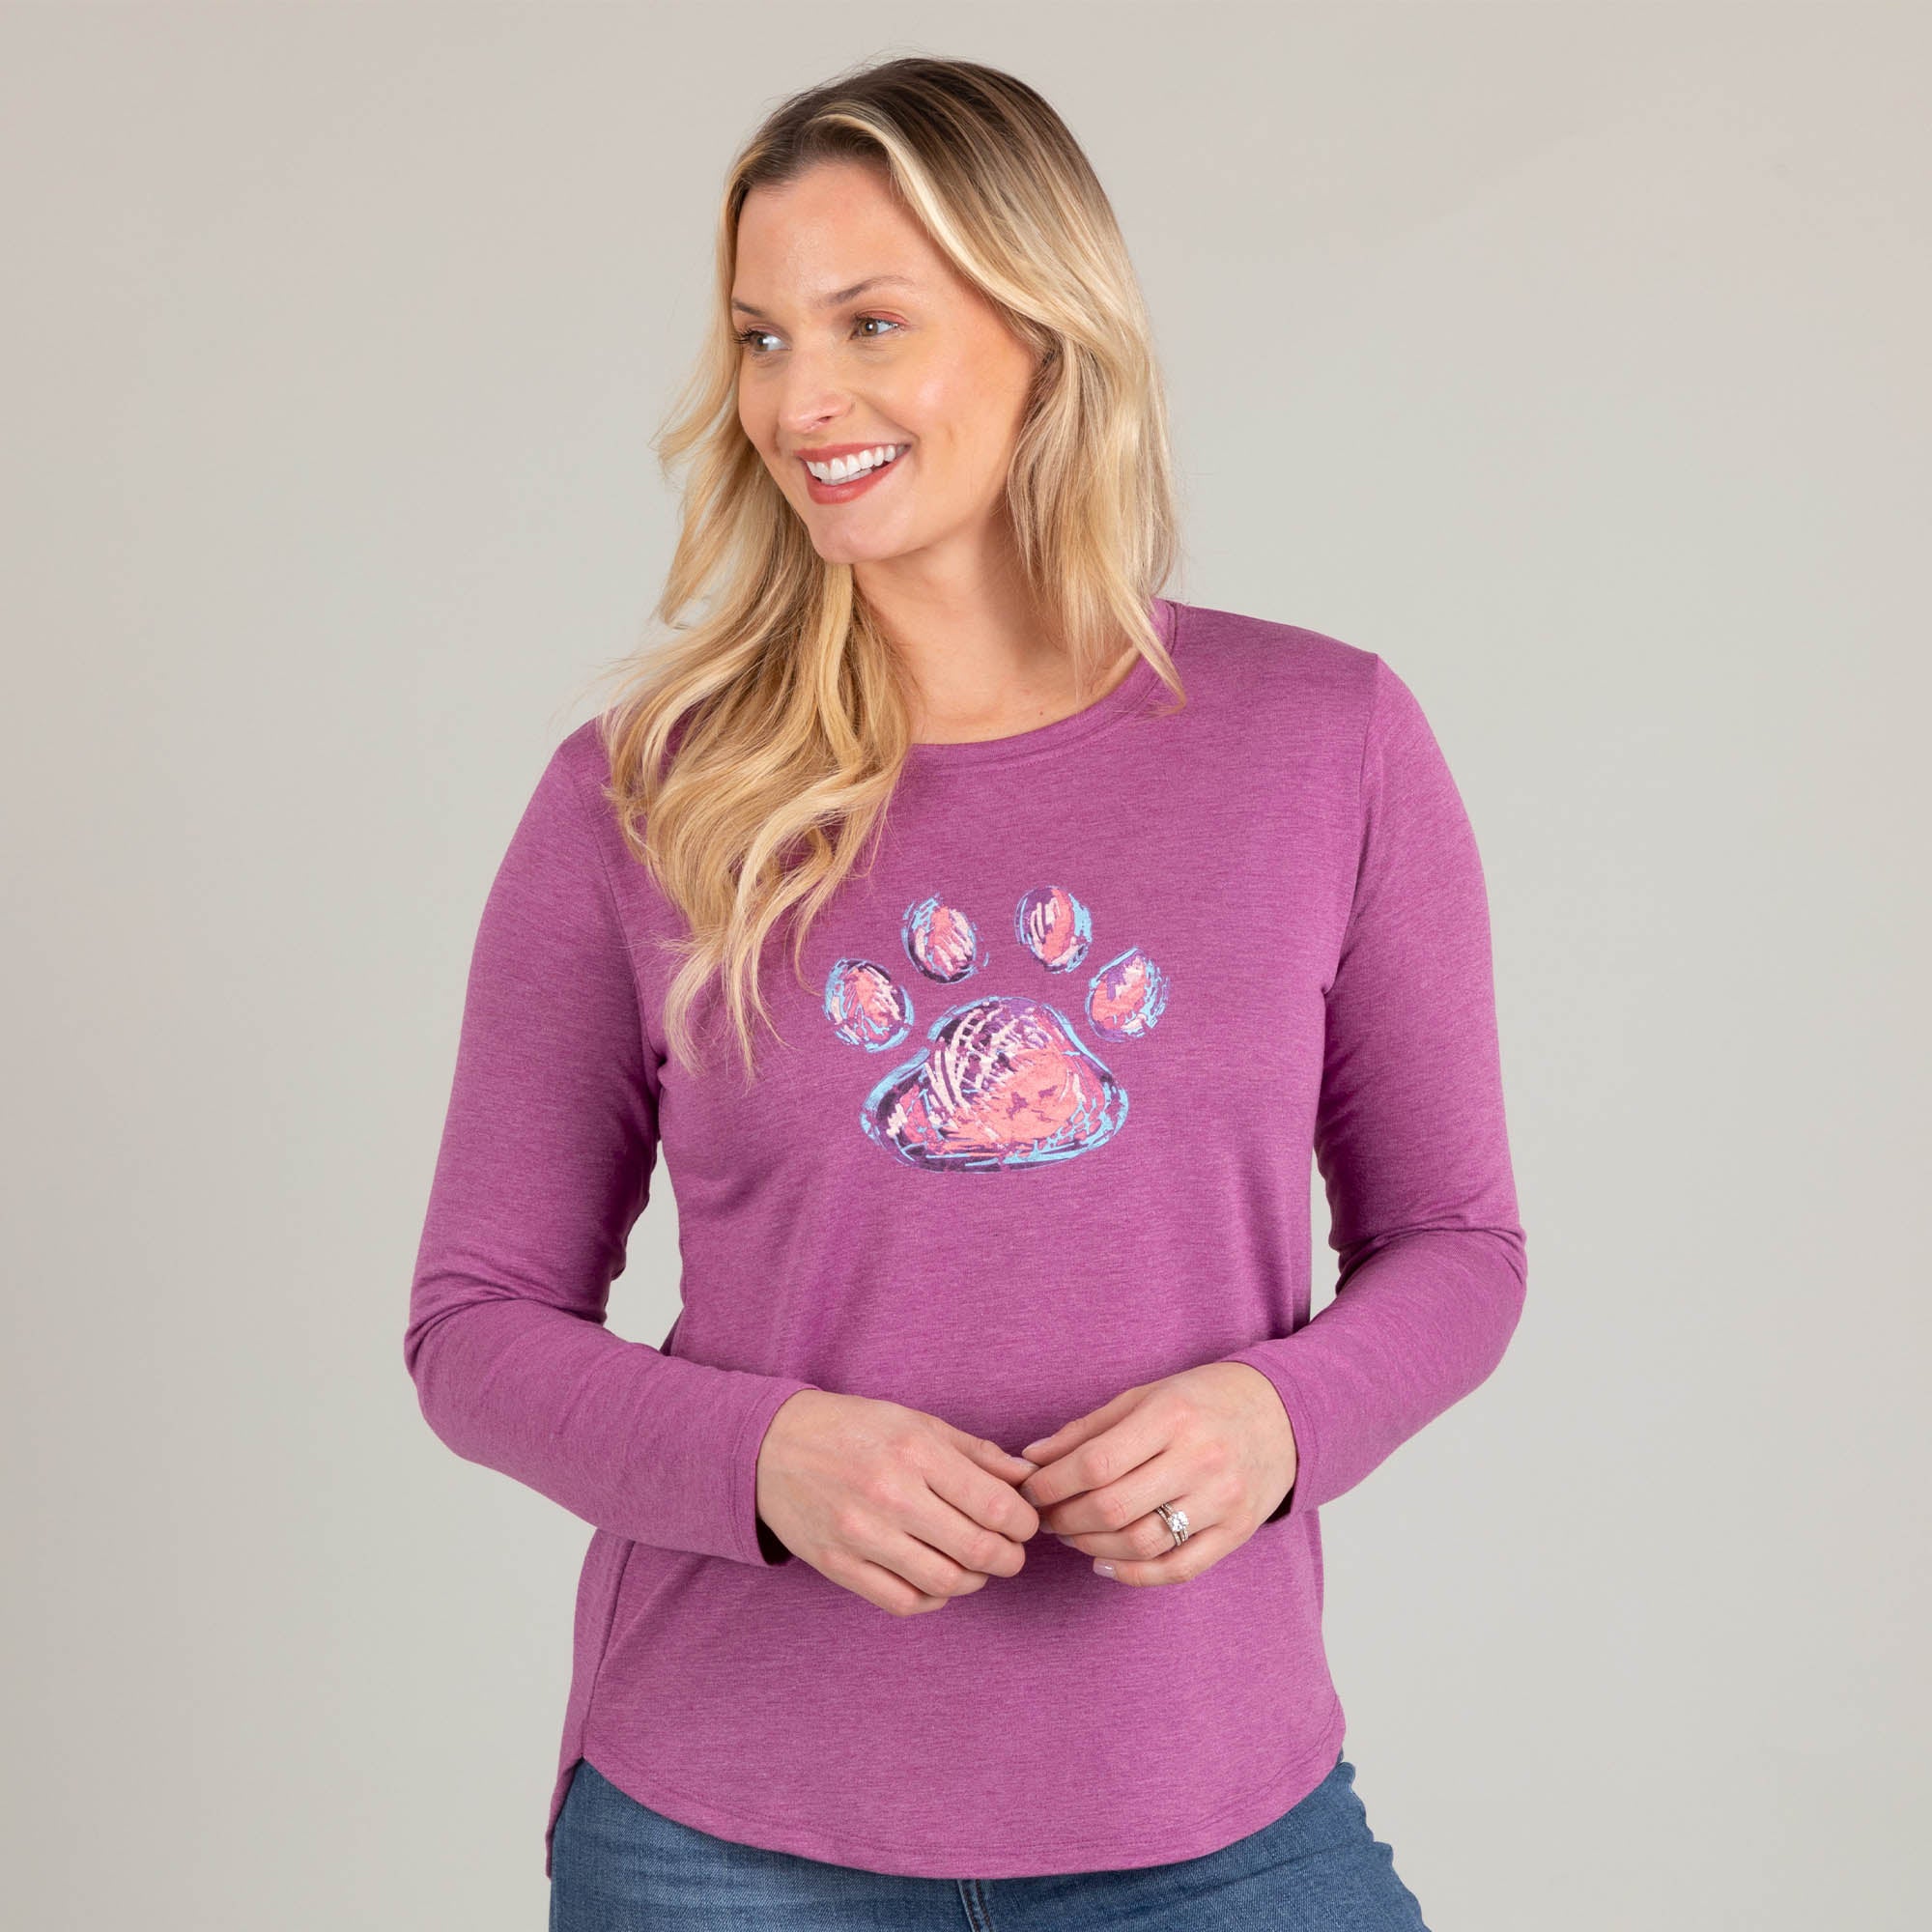 Paw Print French Terry Scoop Neck Top - XL